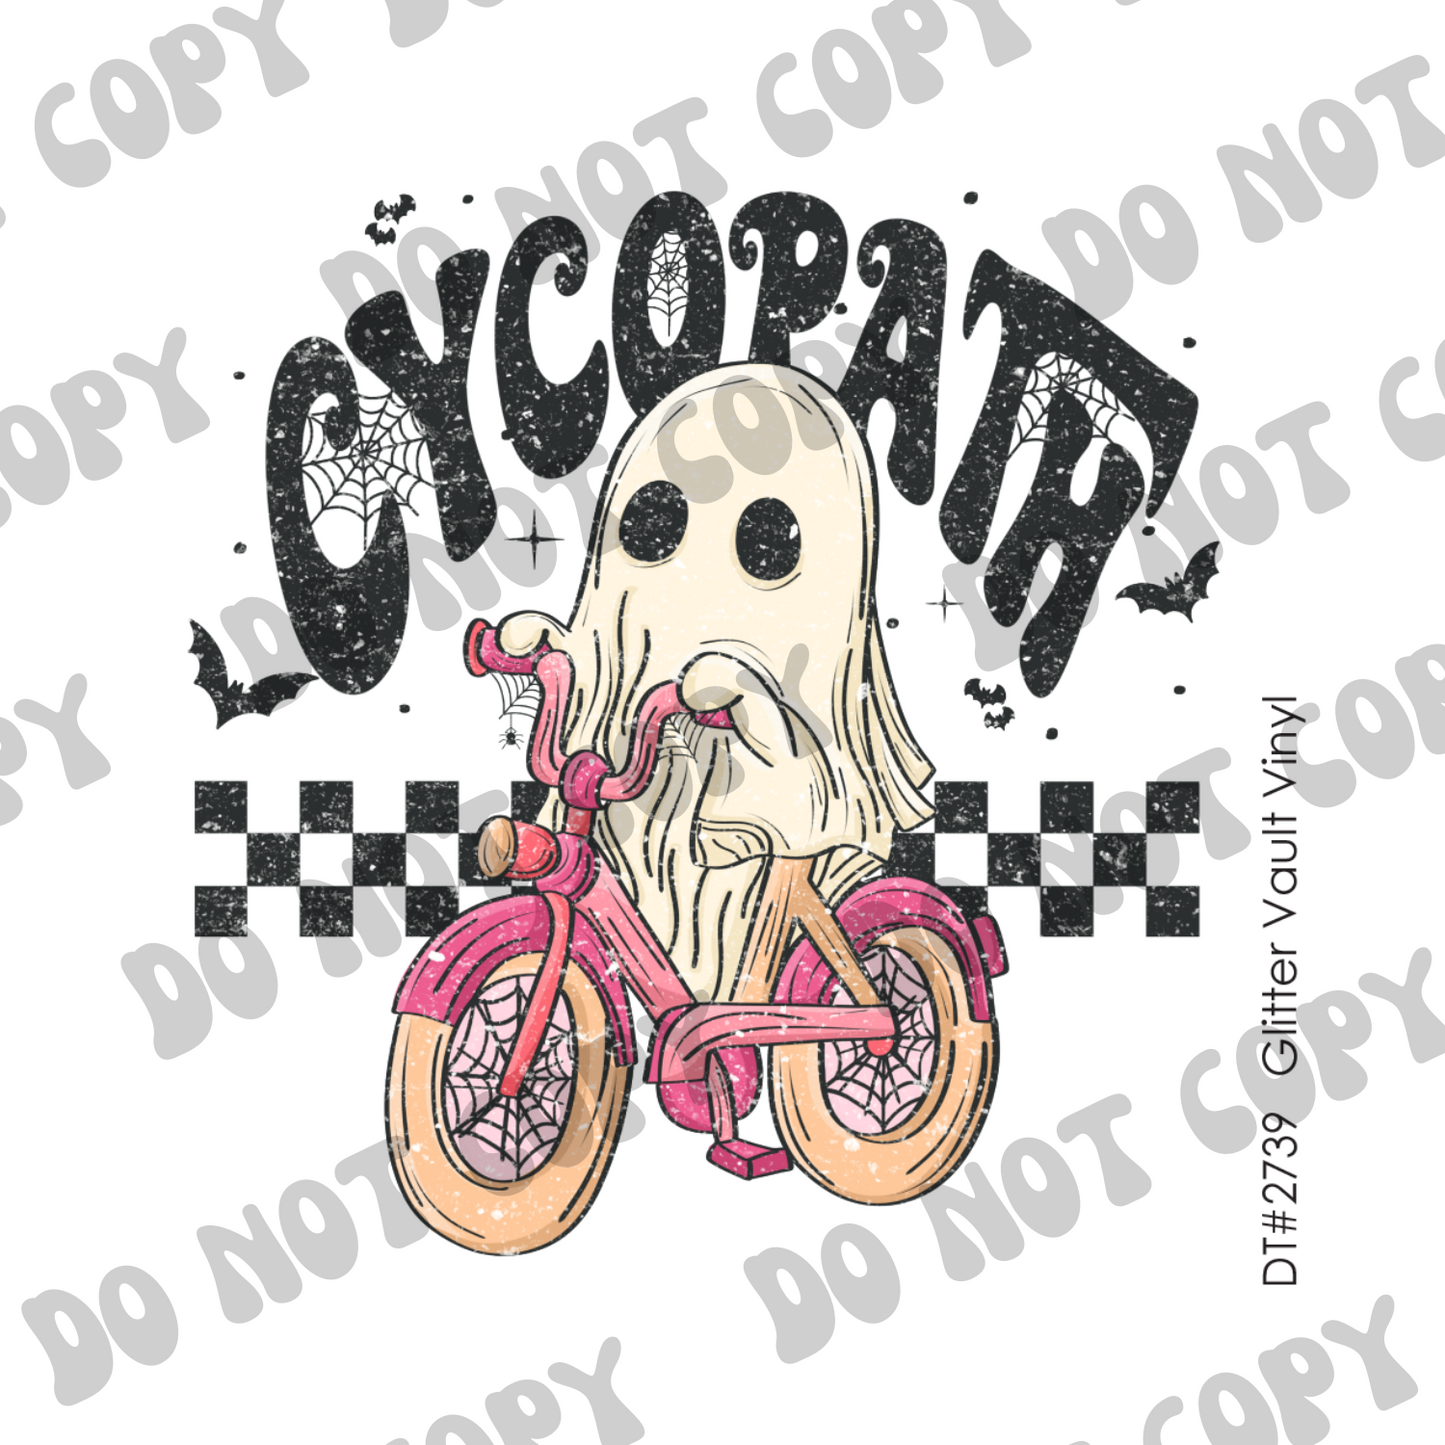 DT# 2739 - Cycopath - Transparent Decal - Grunge Effect